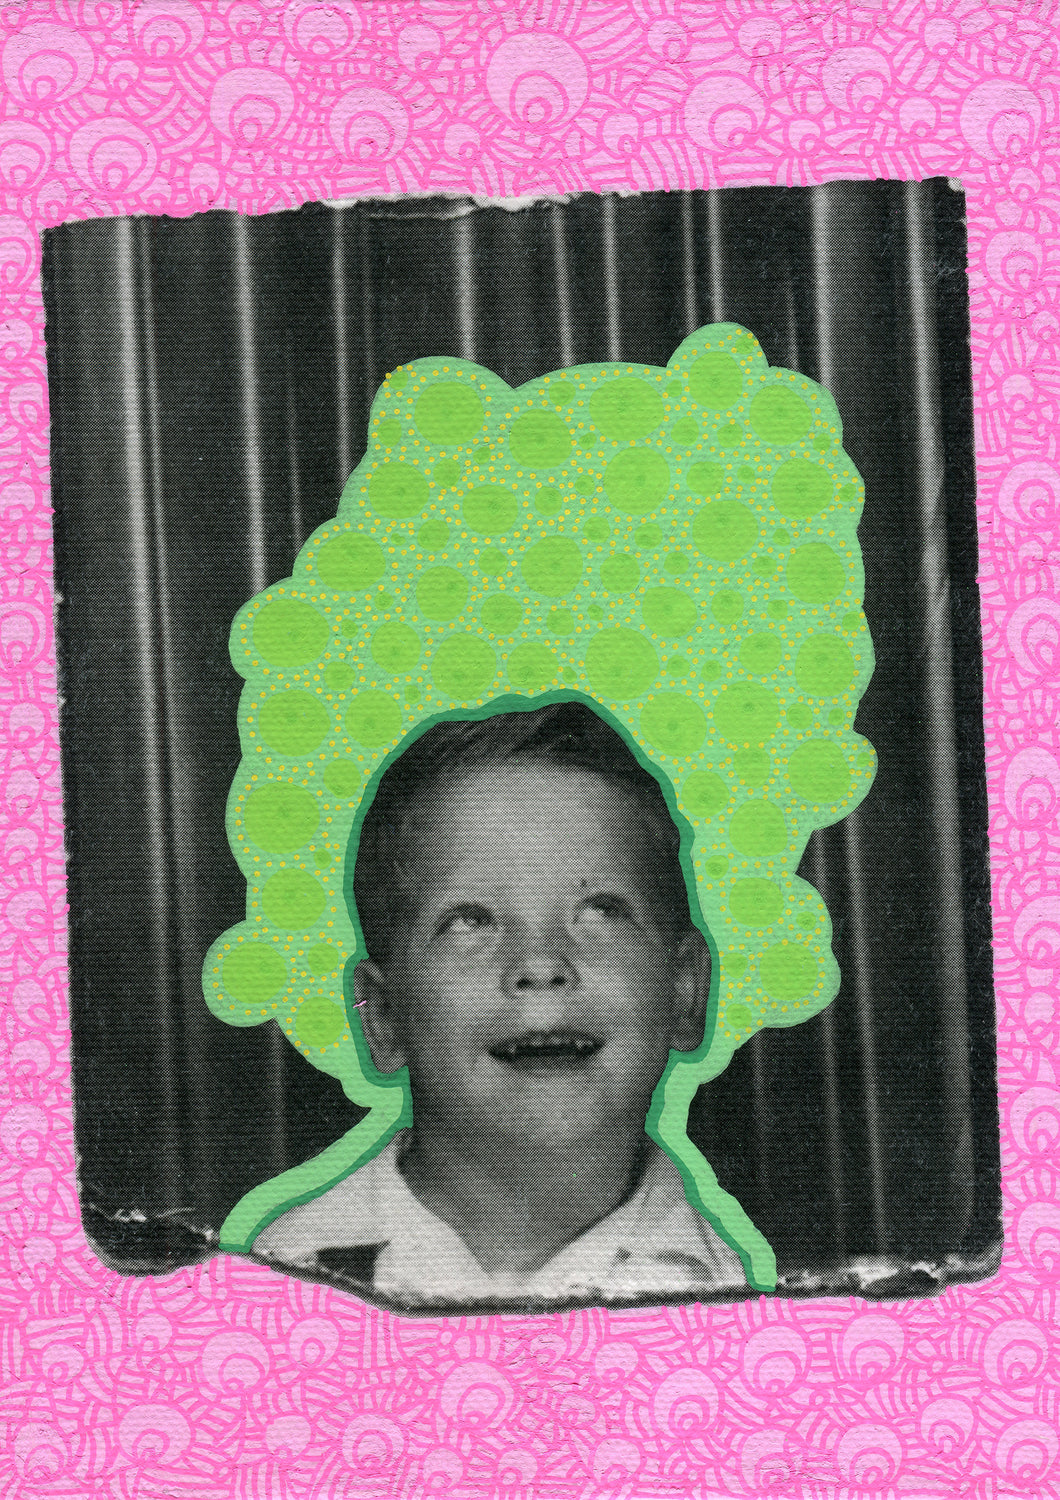 Smiling Boy Vintage Photo Booth Photo Altered By Hand - Naomi Vona Art